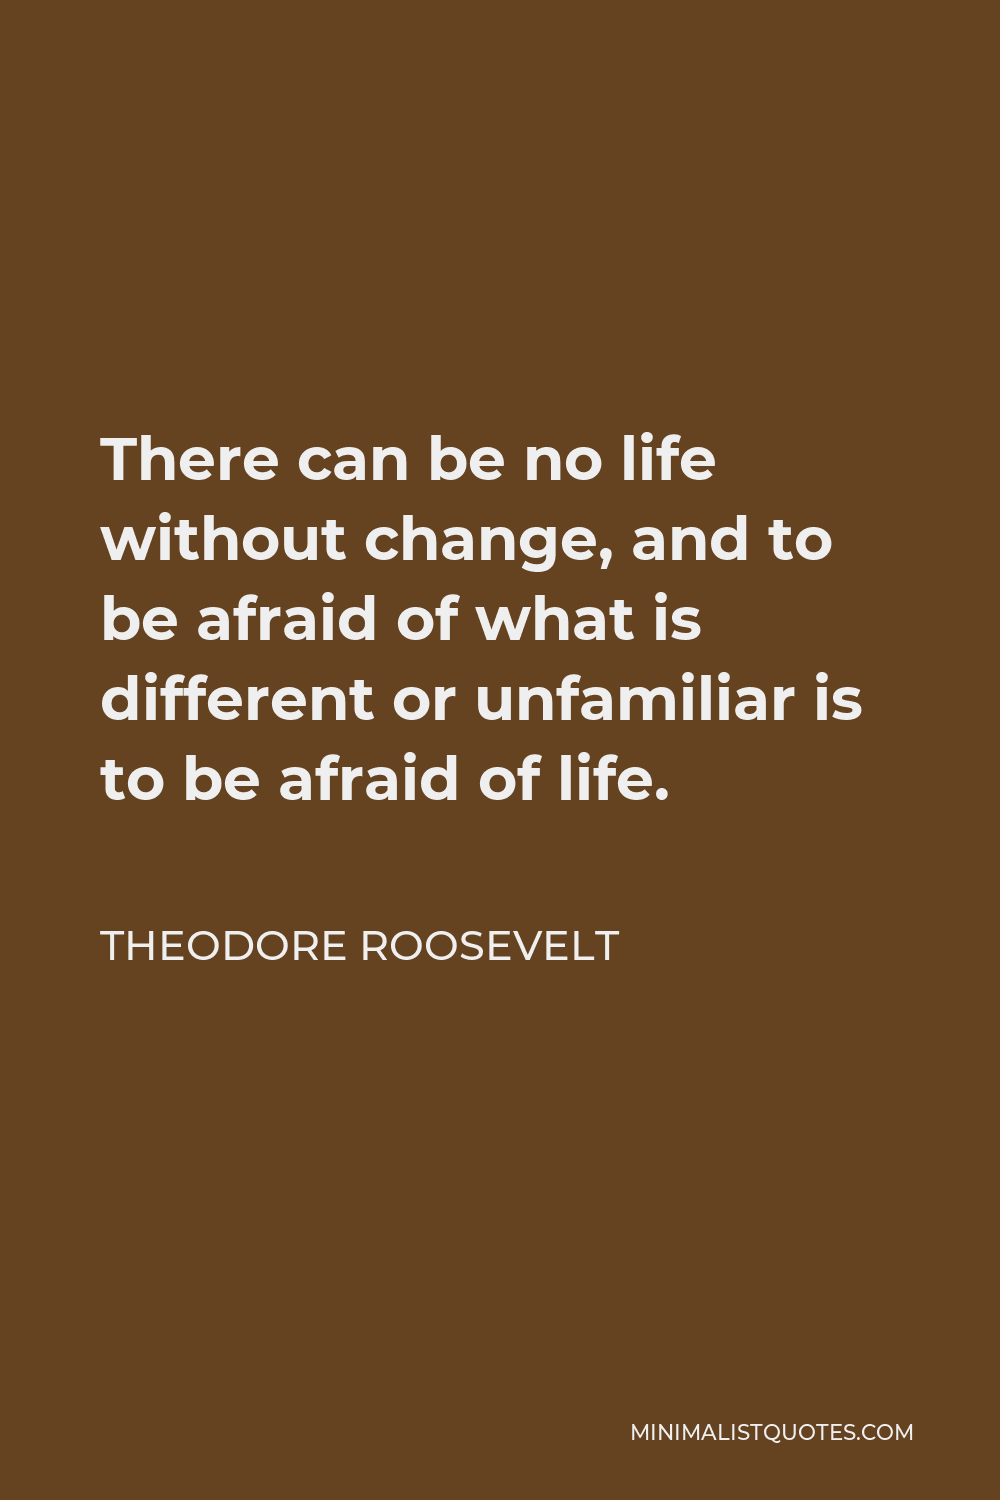 Theodore Roosevelt Quote - There can be no life without change, and to be afraid of what is different or unfamiliar is to be afraid of life.